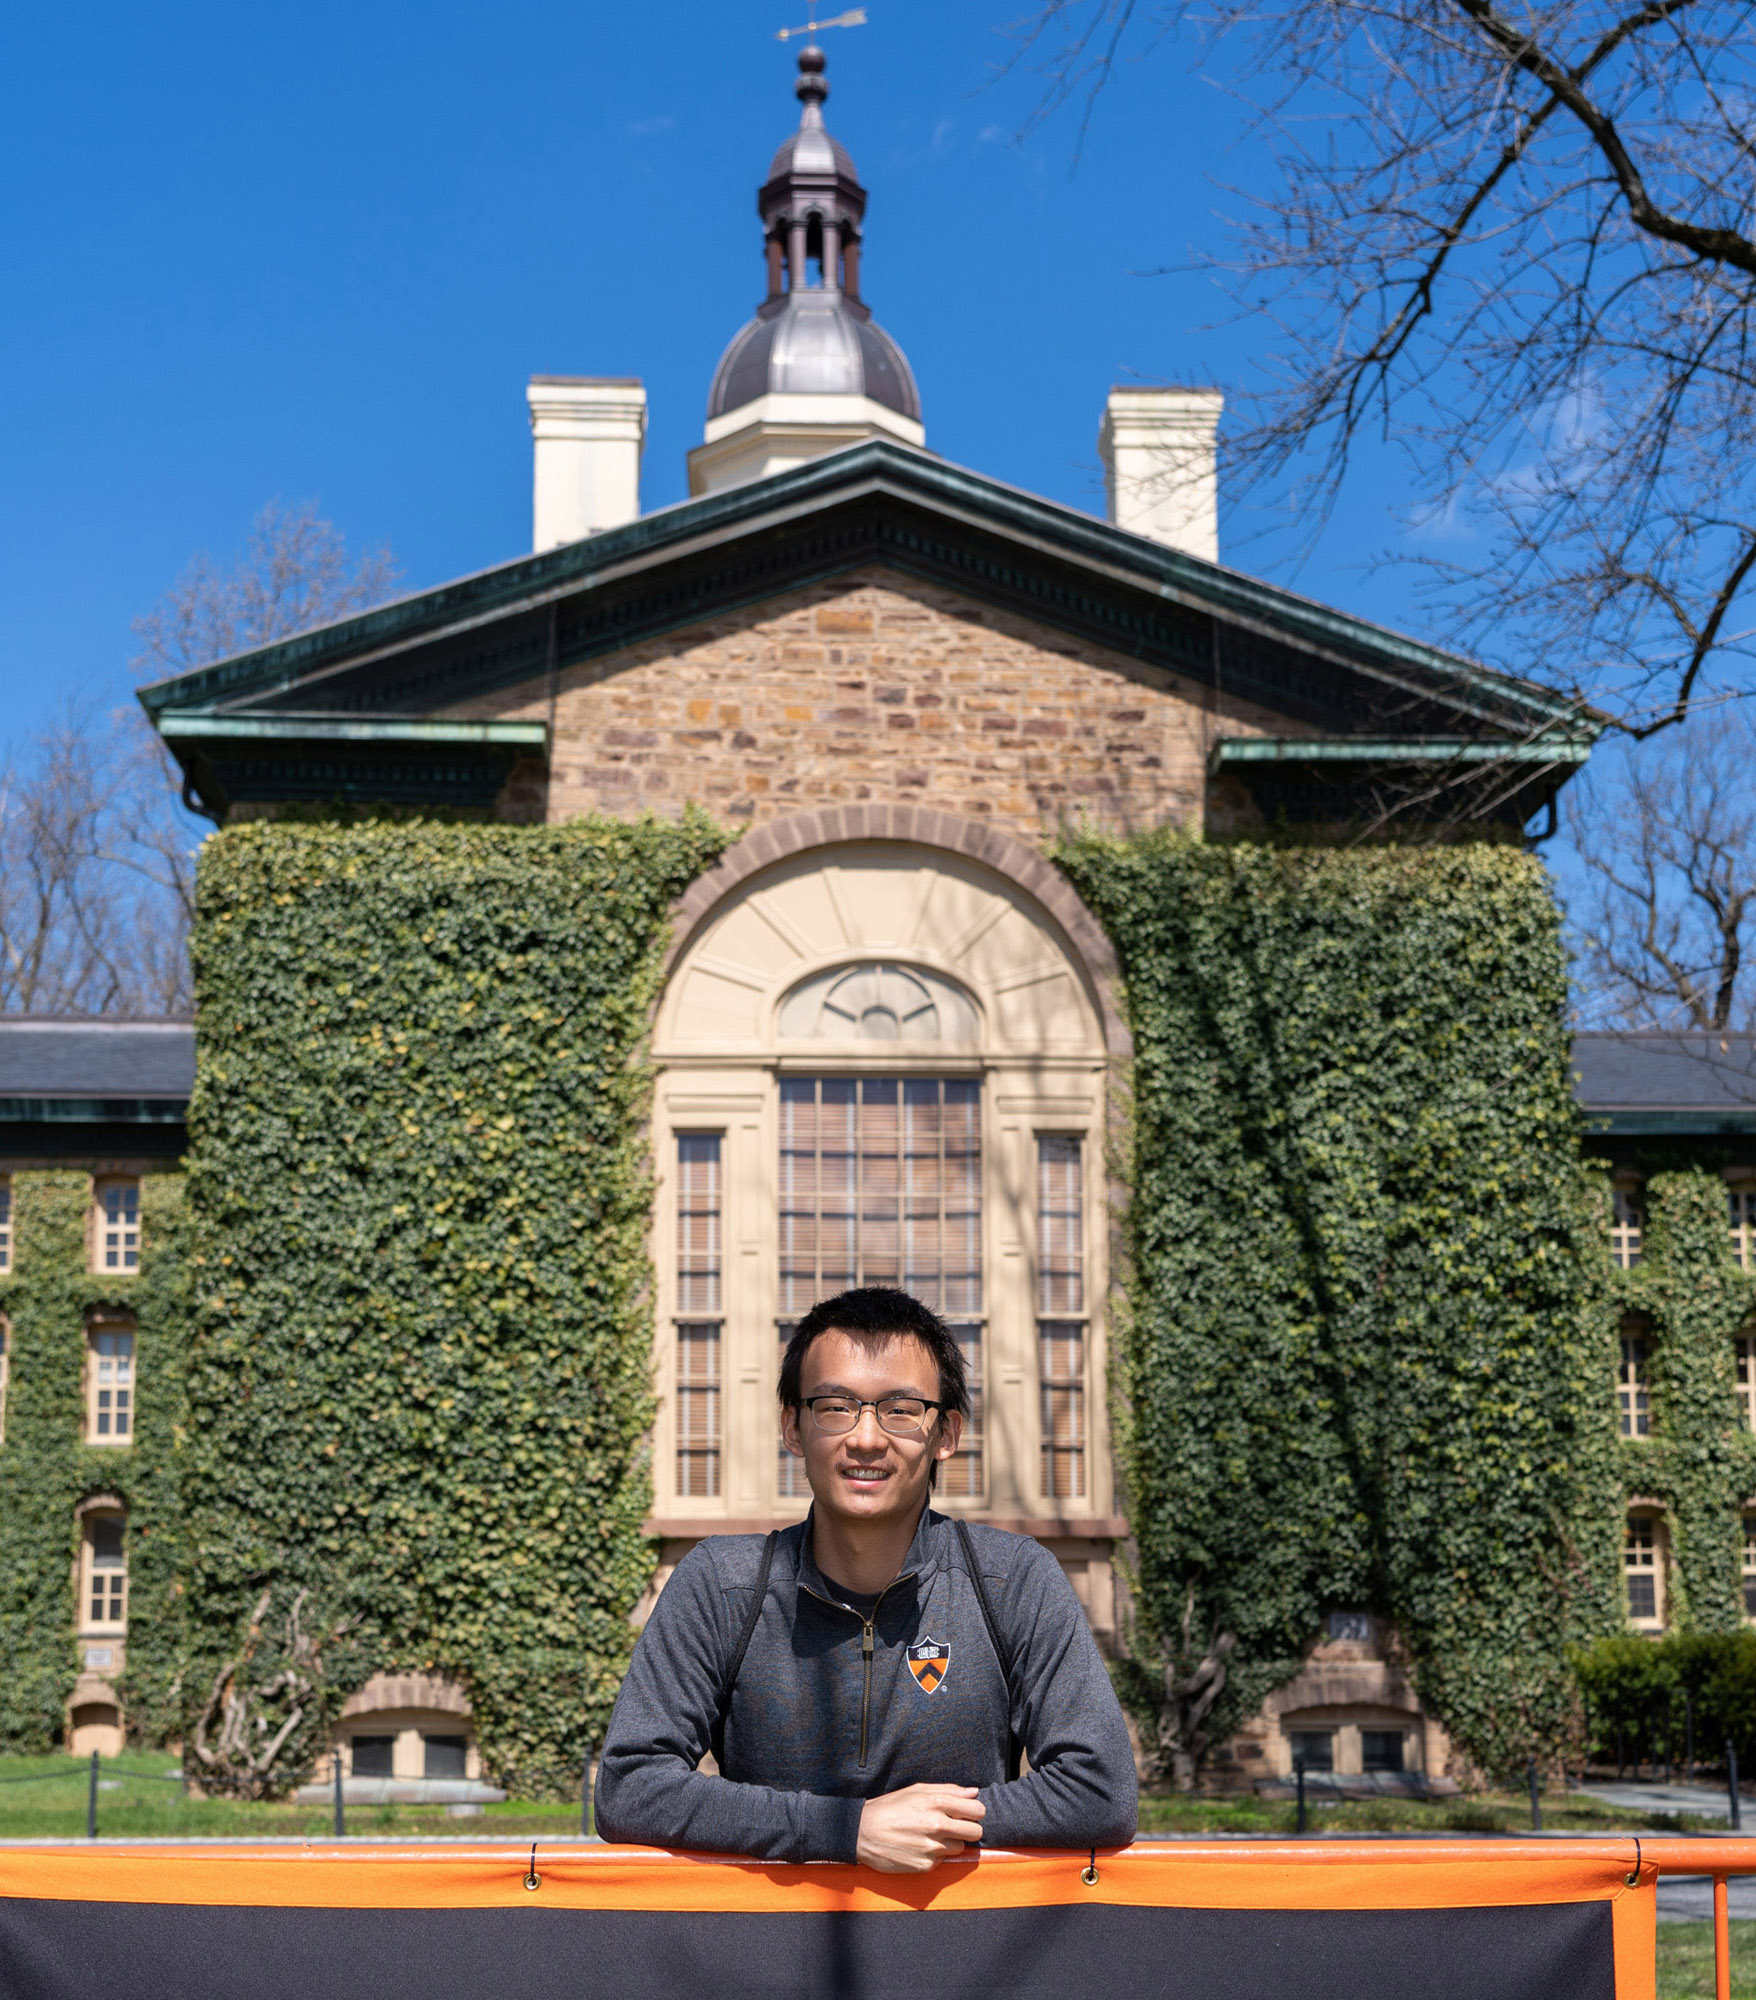 Enlarged view: Daniel Yang stands in front of Nassau Hall, a collegial gothic building covered in ivy